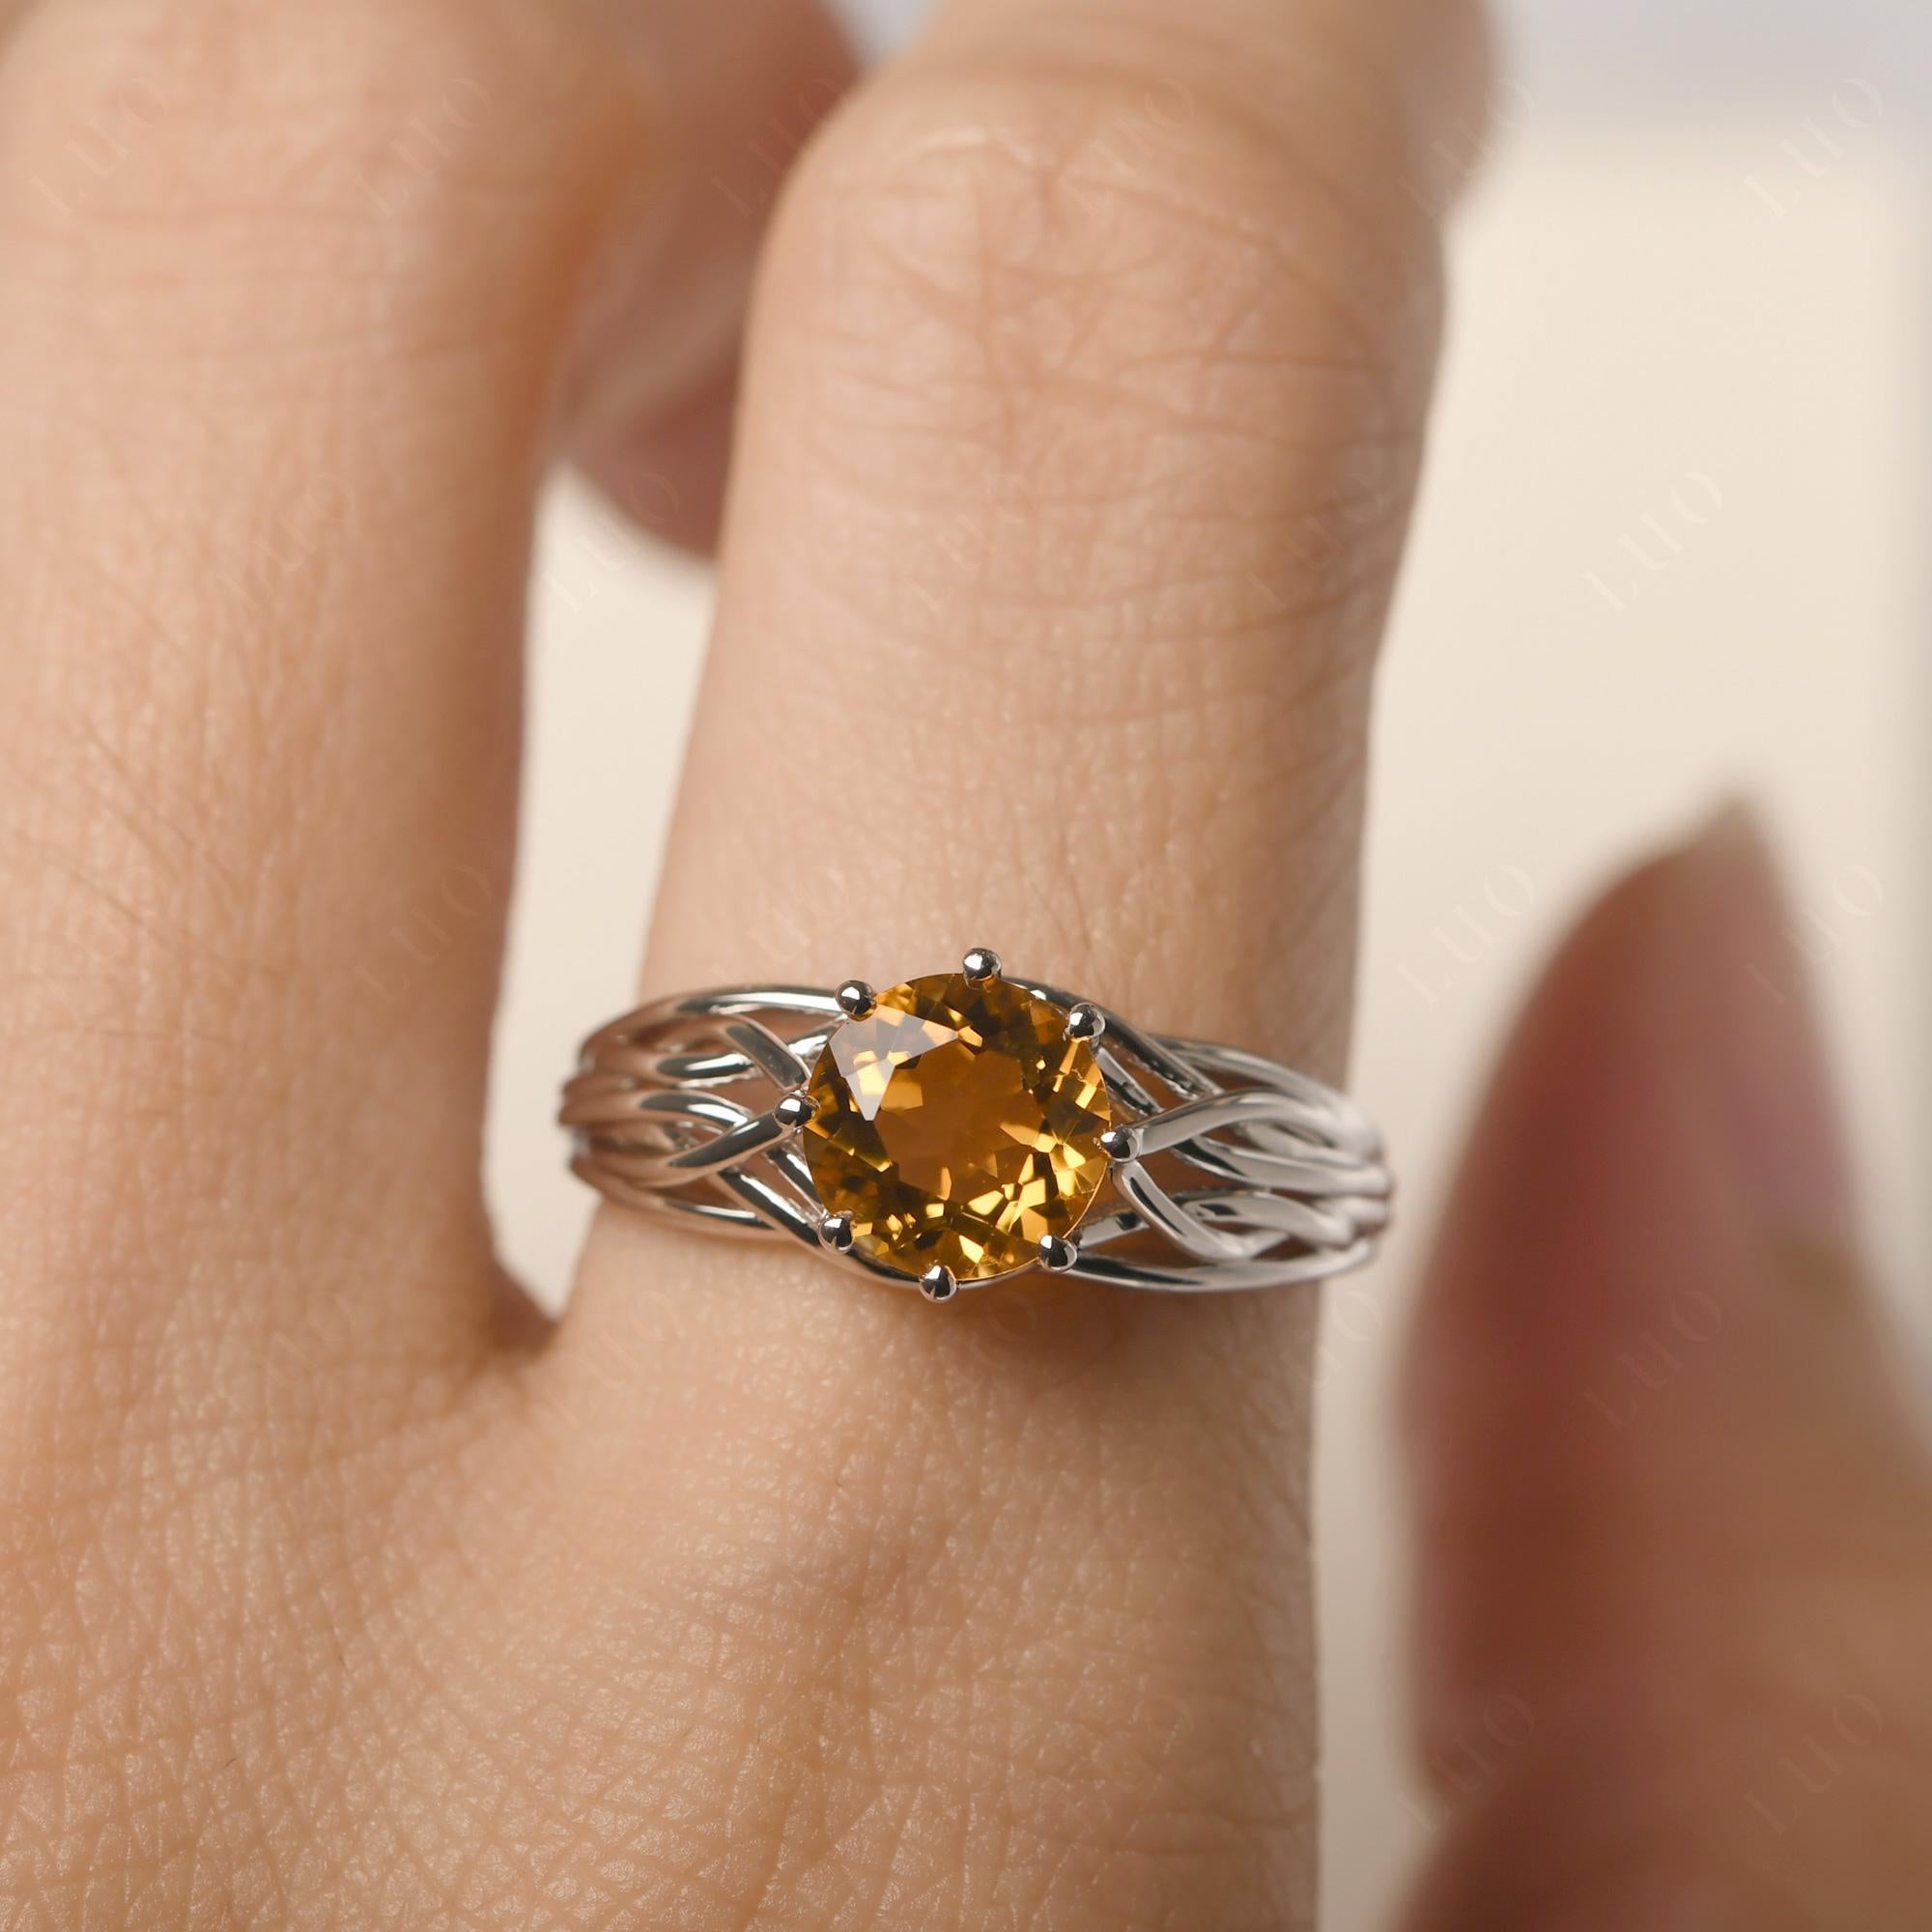 Intertwined Citrine Wedding Ring - LUO Jewelry